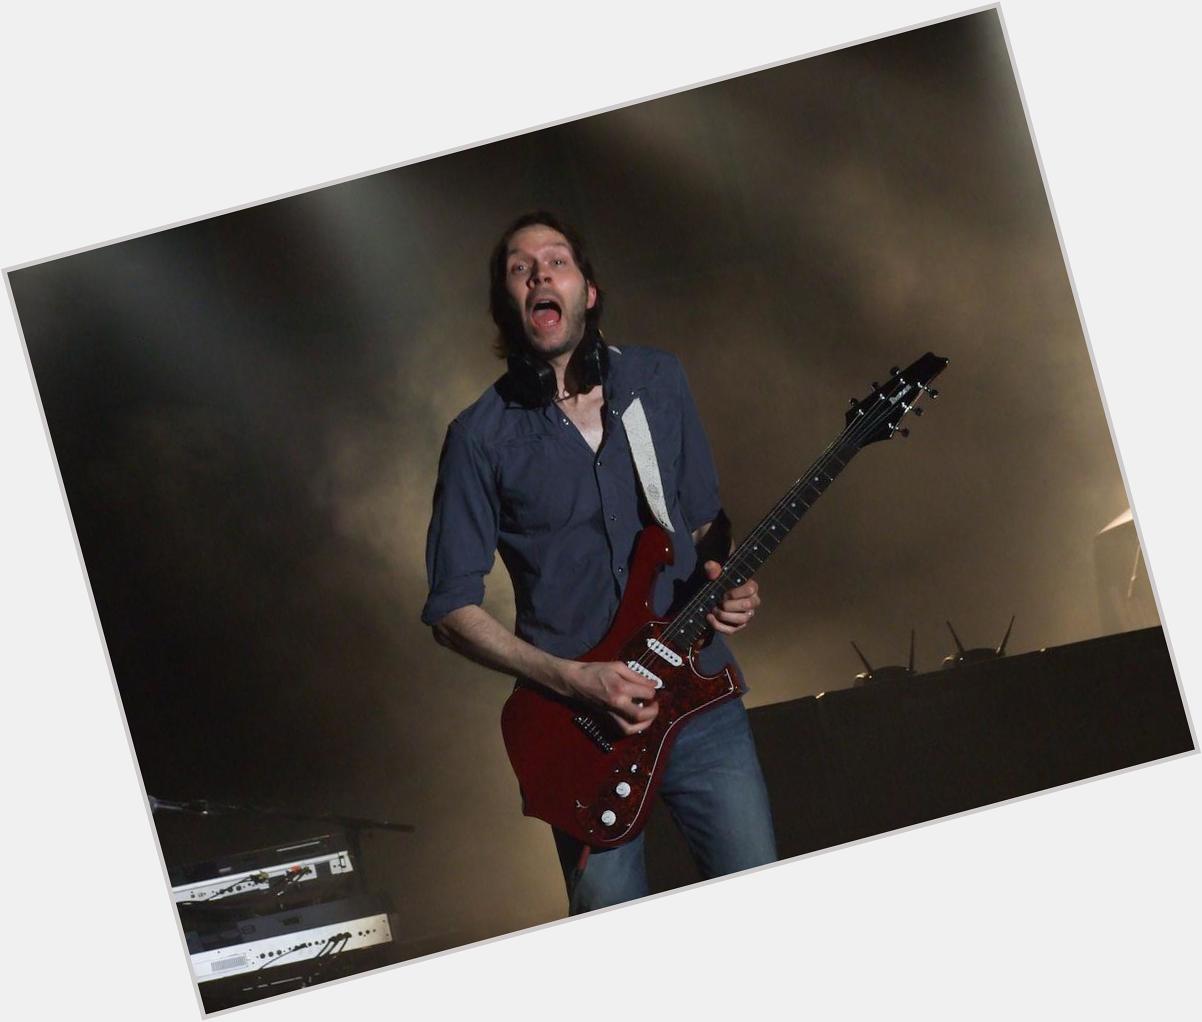 Happy 48th birthday, Paul Gilbert, awesome guitarist, co-founder of Mr. Big  "To Be With You" 